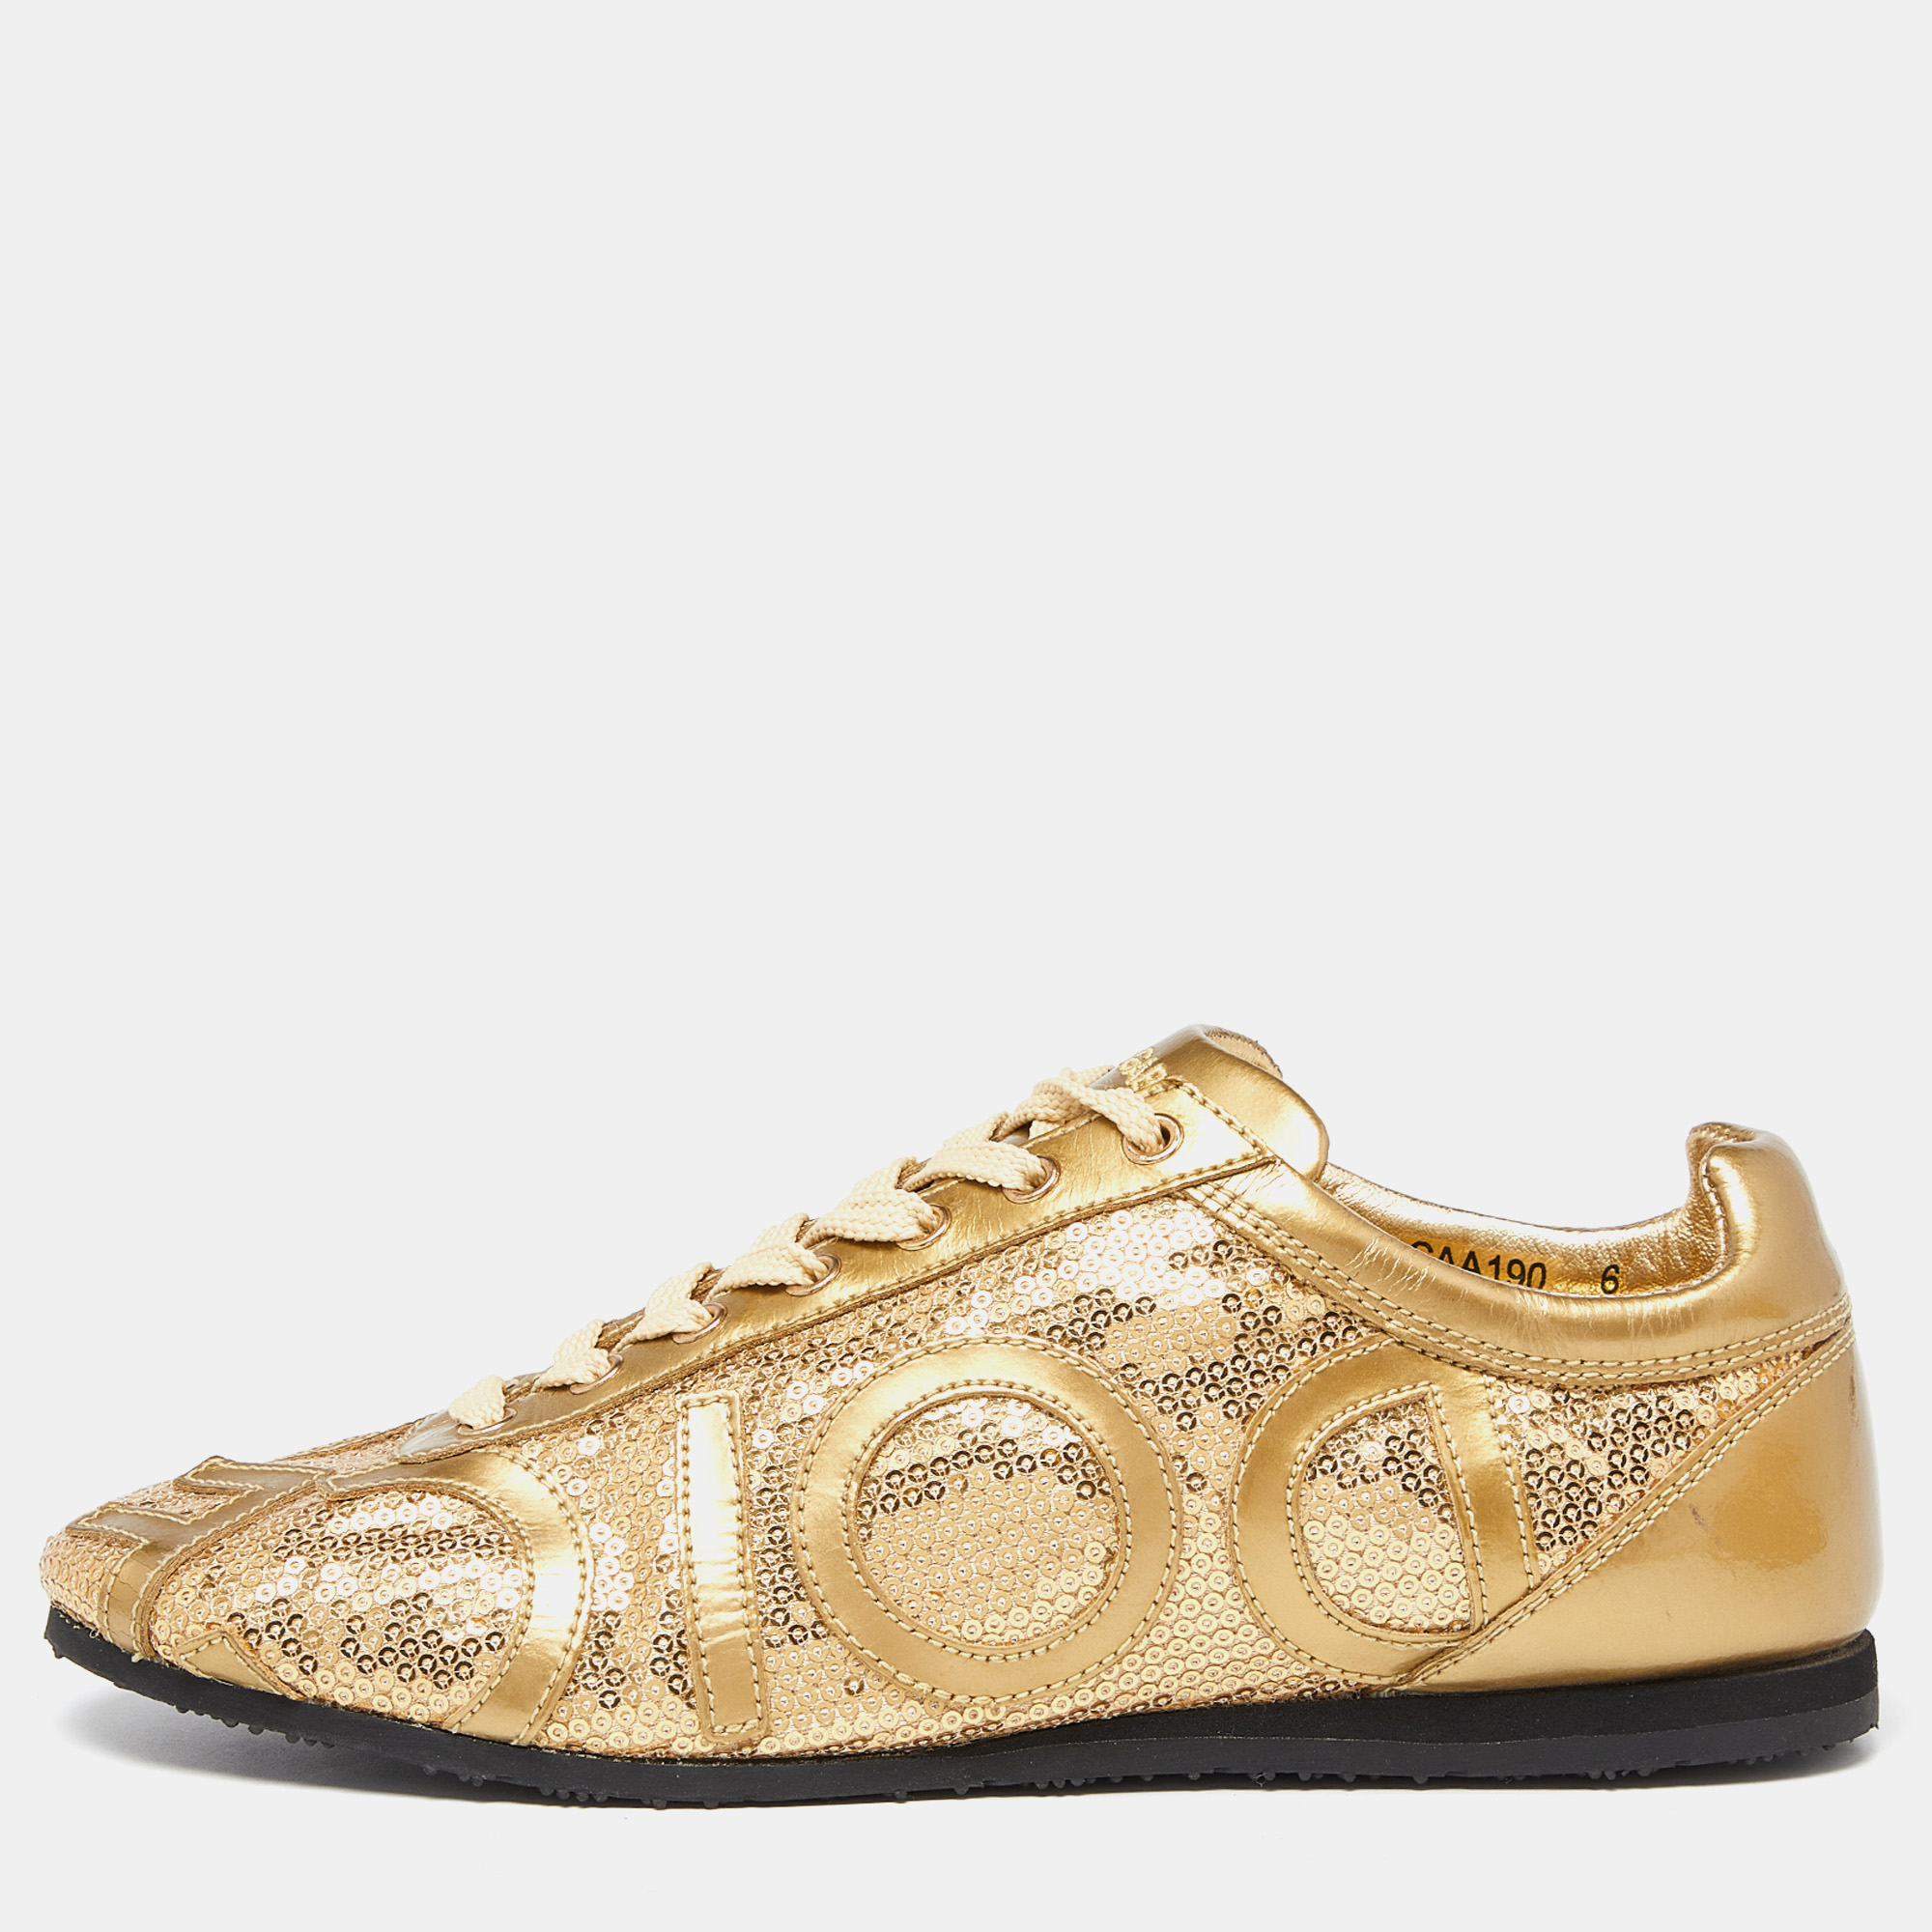 Dolce & Gabbana Gold Patent Leather And Sequin Embellished Low Top Sneakers Size 40